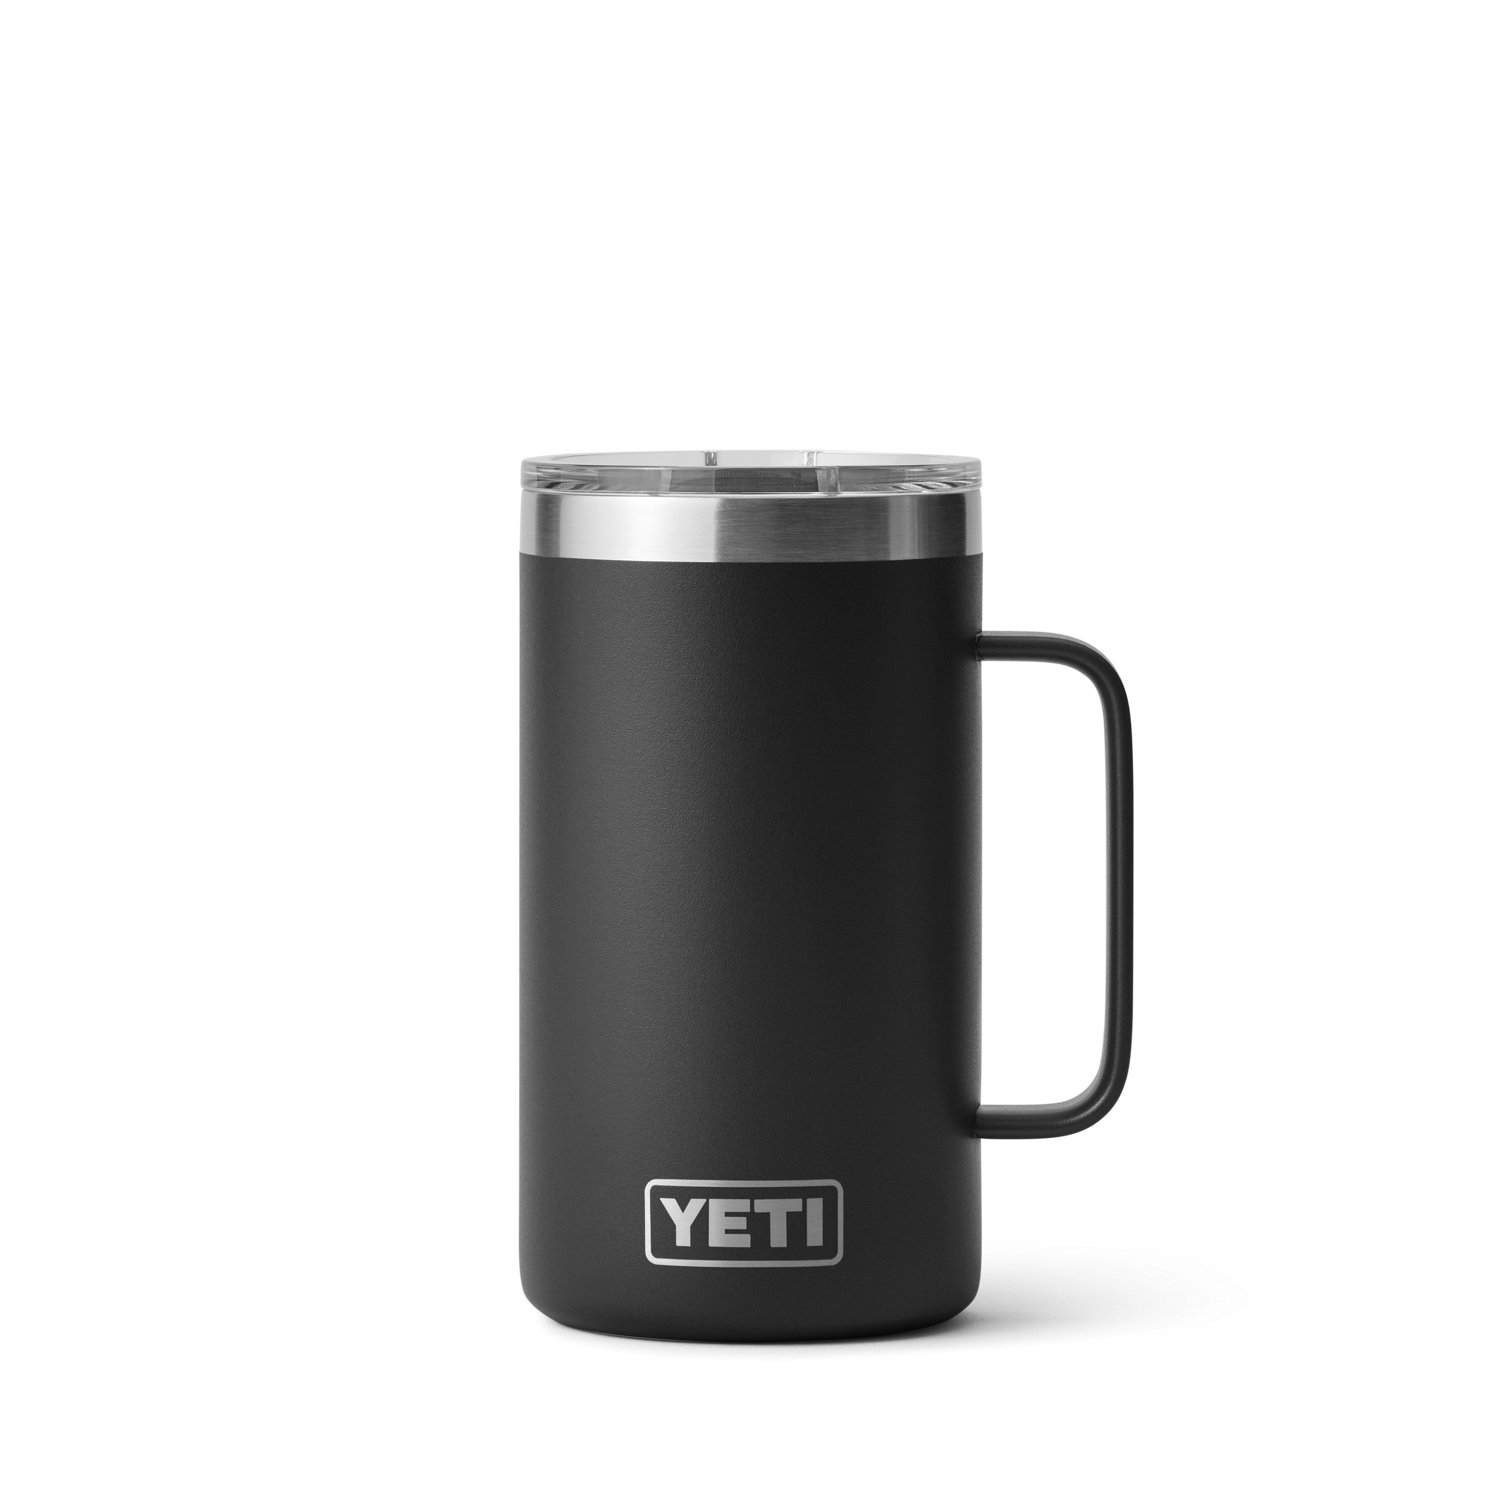  YETI Rambler 24 oz Mug, Vacuum Insulated, Stainless Steel with  MagSlider Lid, Black : Sports & Outdoors